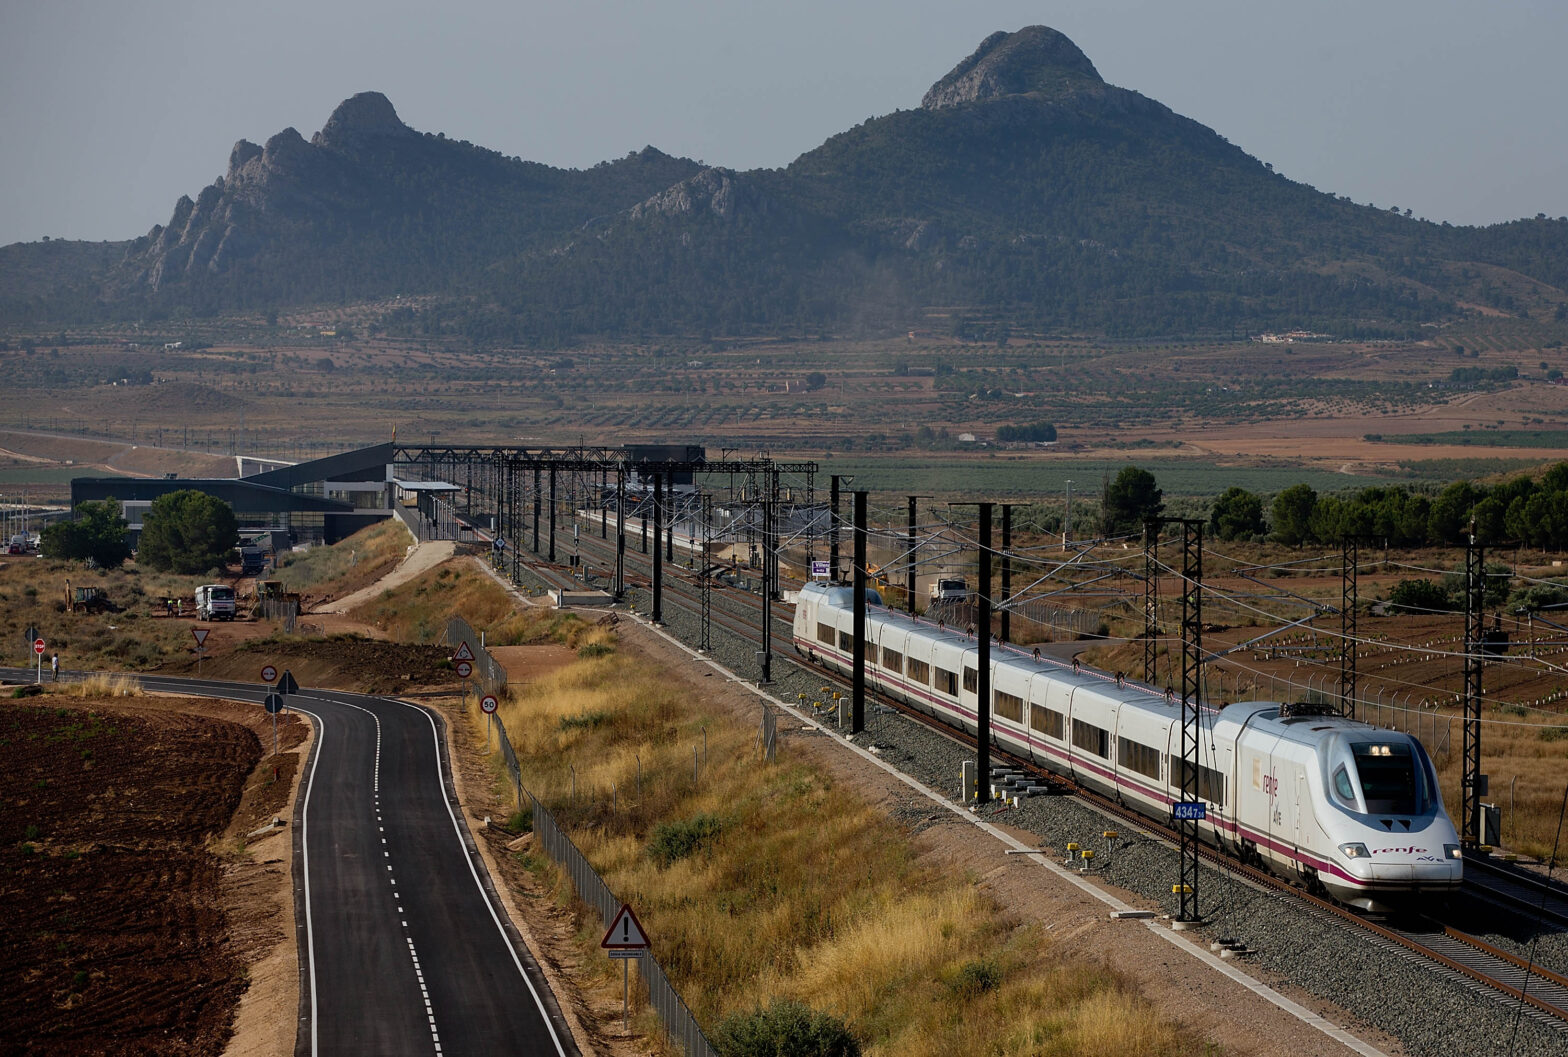 A New Train Line Will Soon Connect Several Of Spain's Most Visited Coastal Cities And Villages